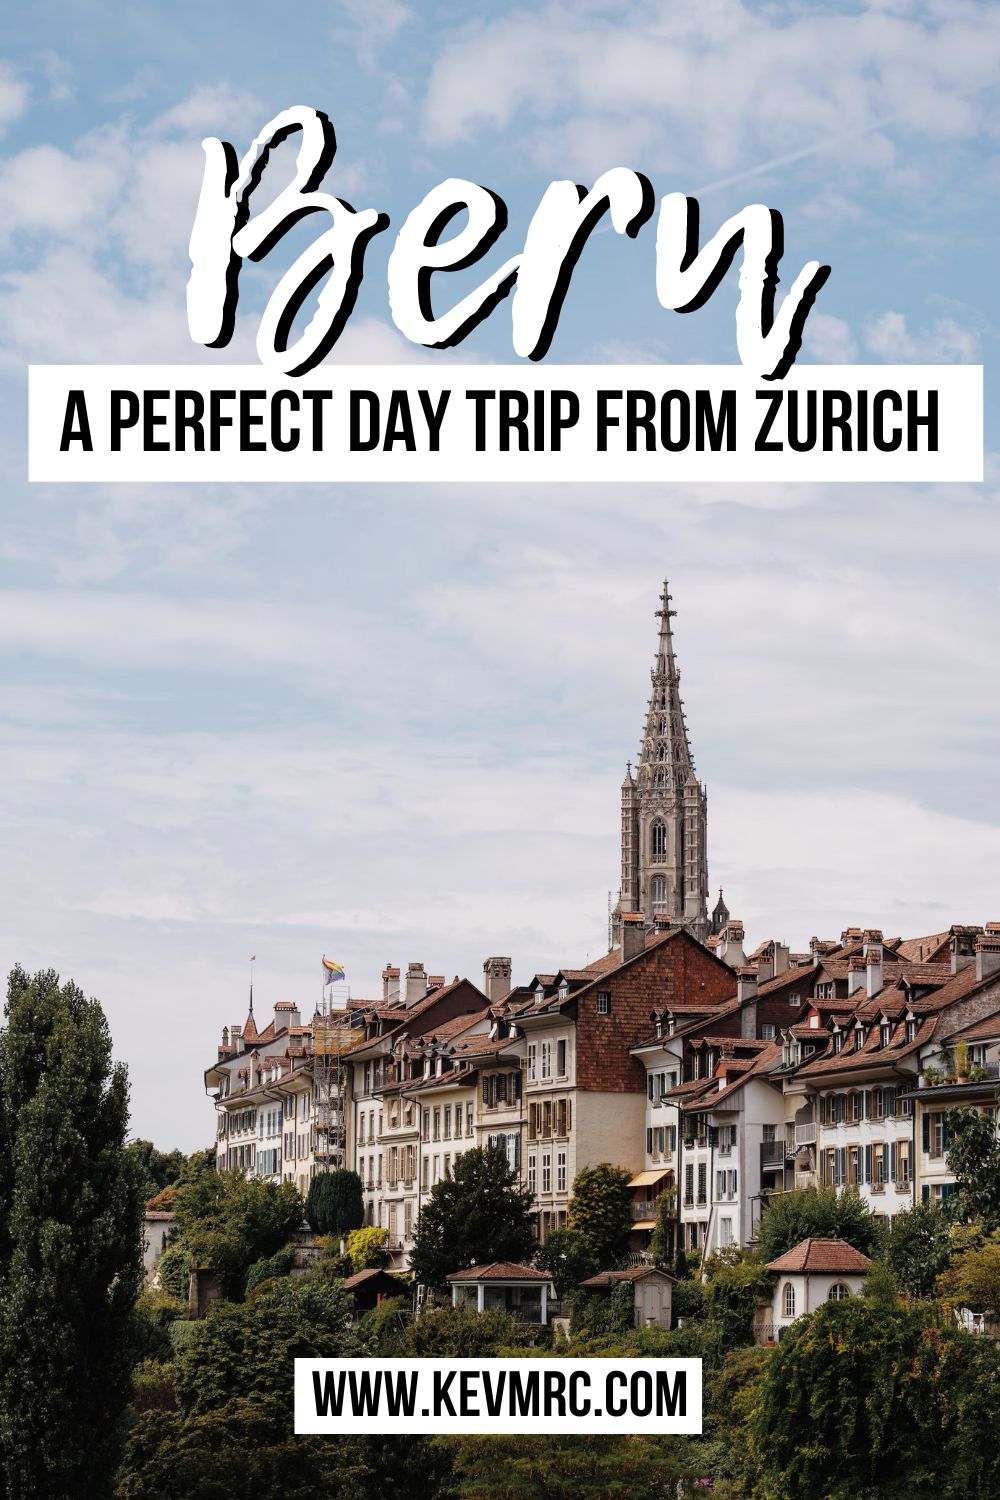 Looking for info to travel from Zurich to Bern? Here is everything you need for a Zurich to Bern day trip, itinerary, and tips included. bern switzerland things to do | bern travel guide | what to do in bern switzerland | day trip from zurich